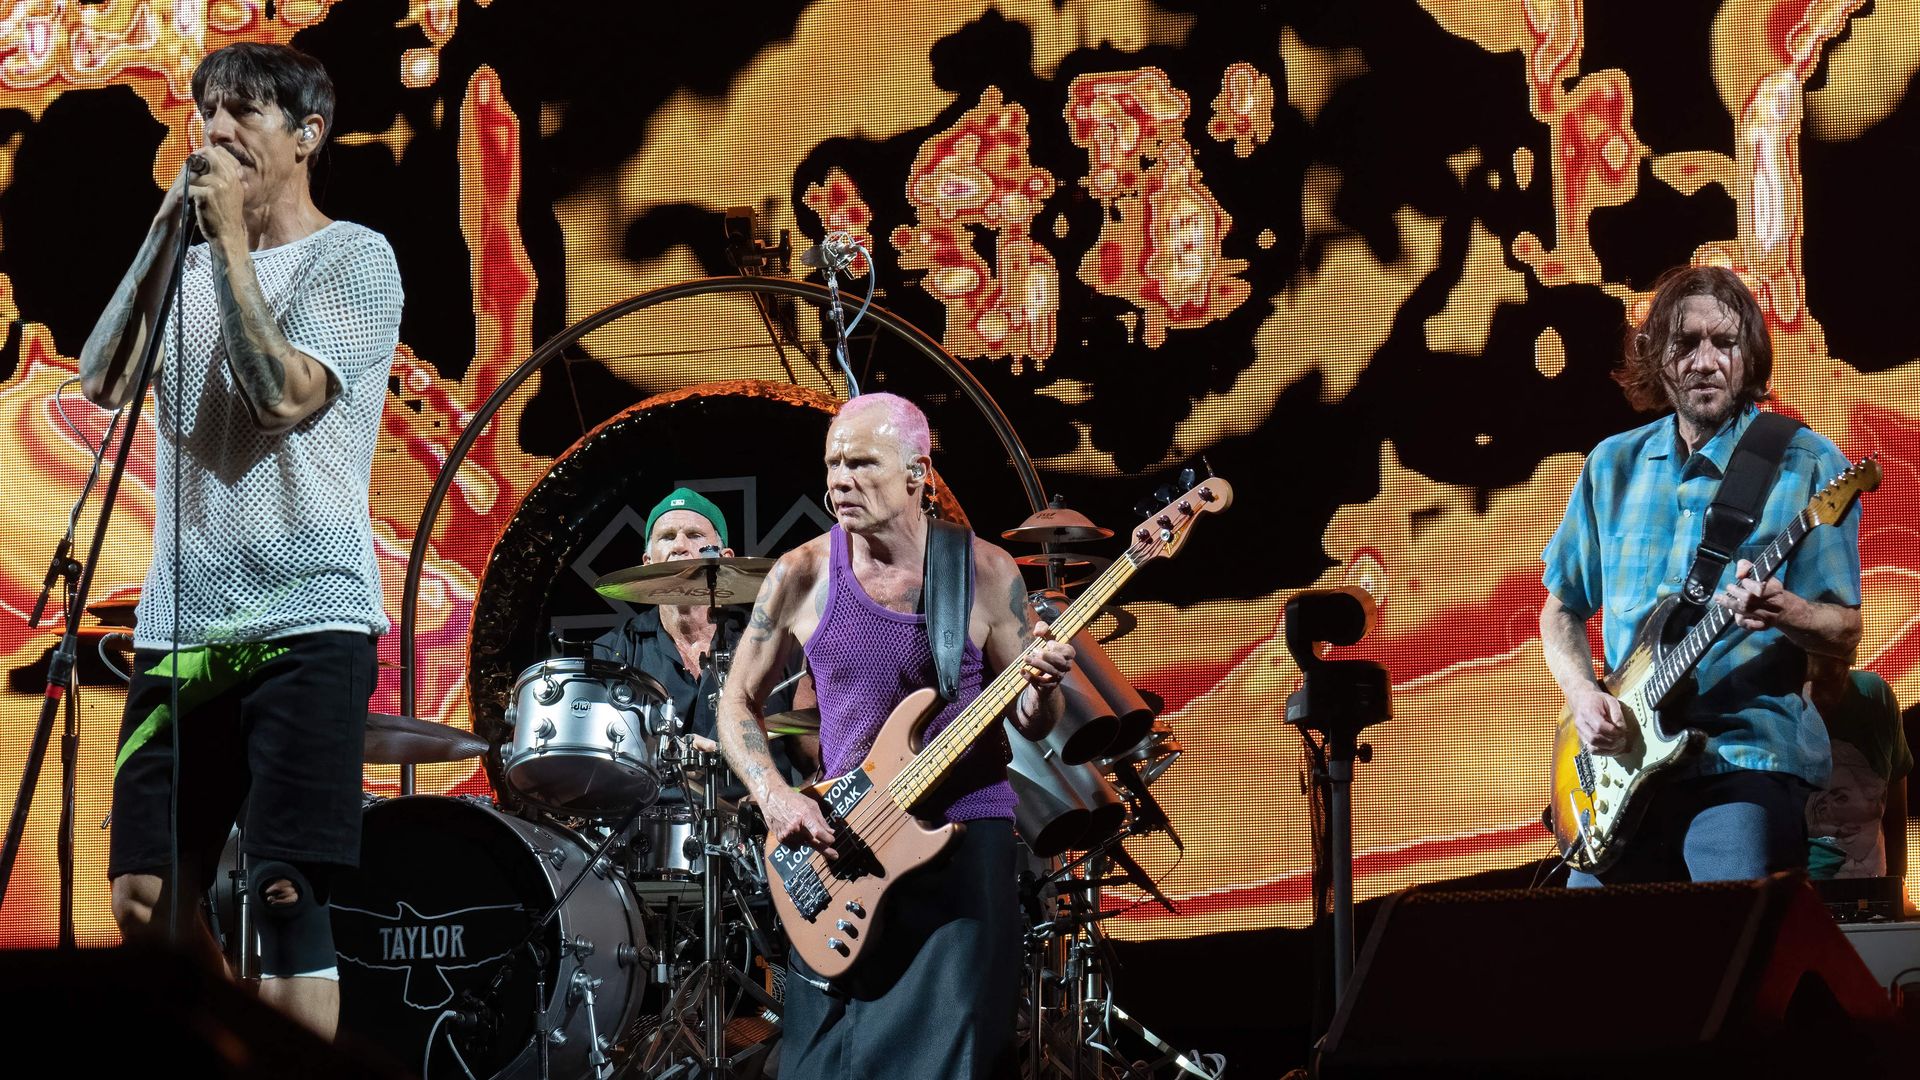 Members of the Red Hot Chili Peppers band perform on stage. 